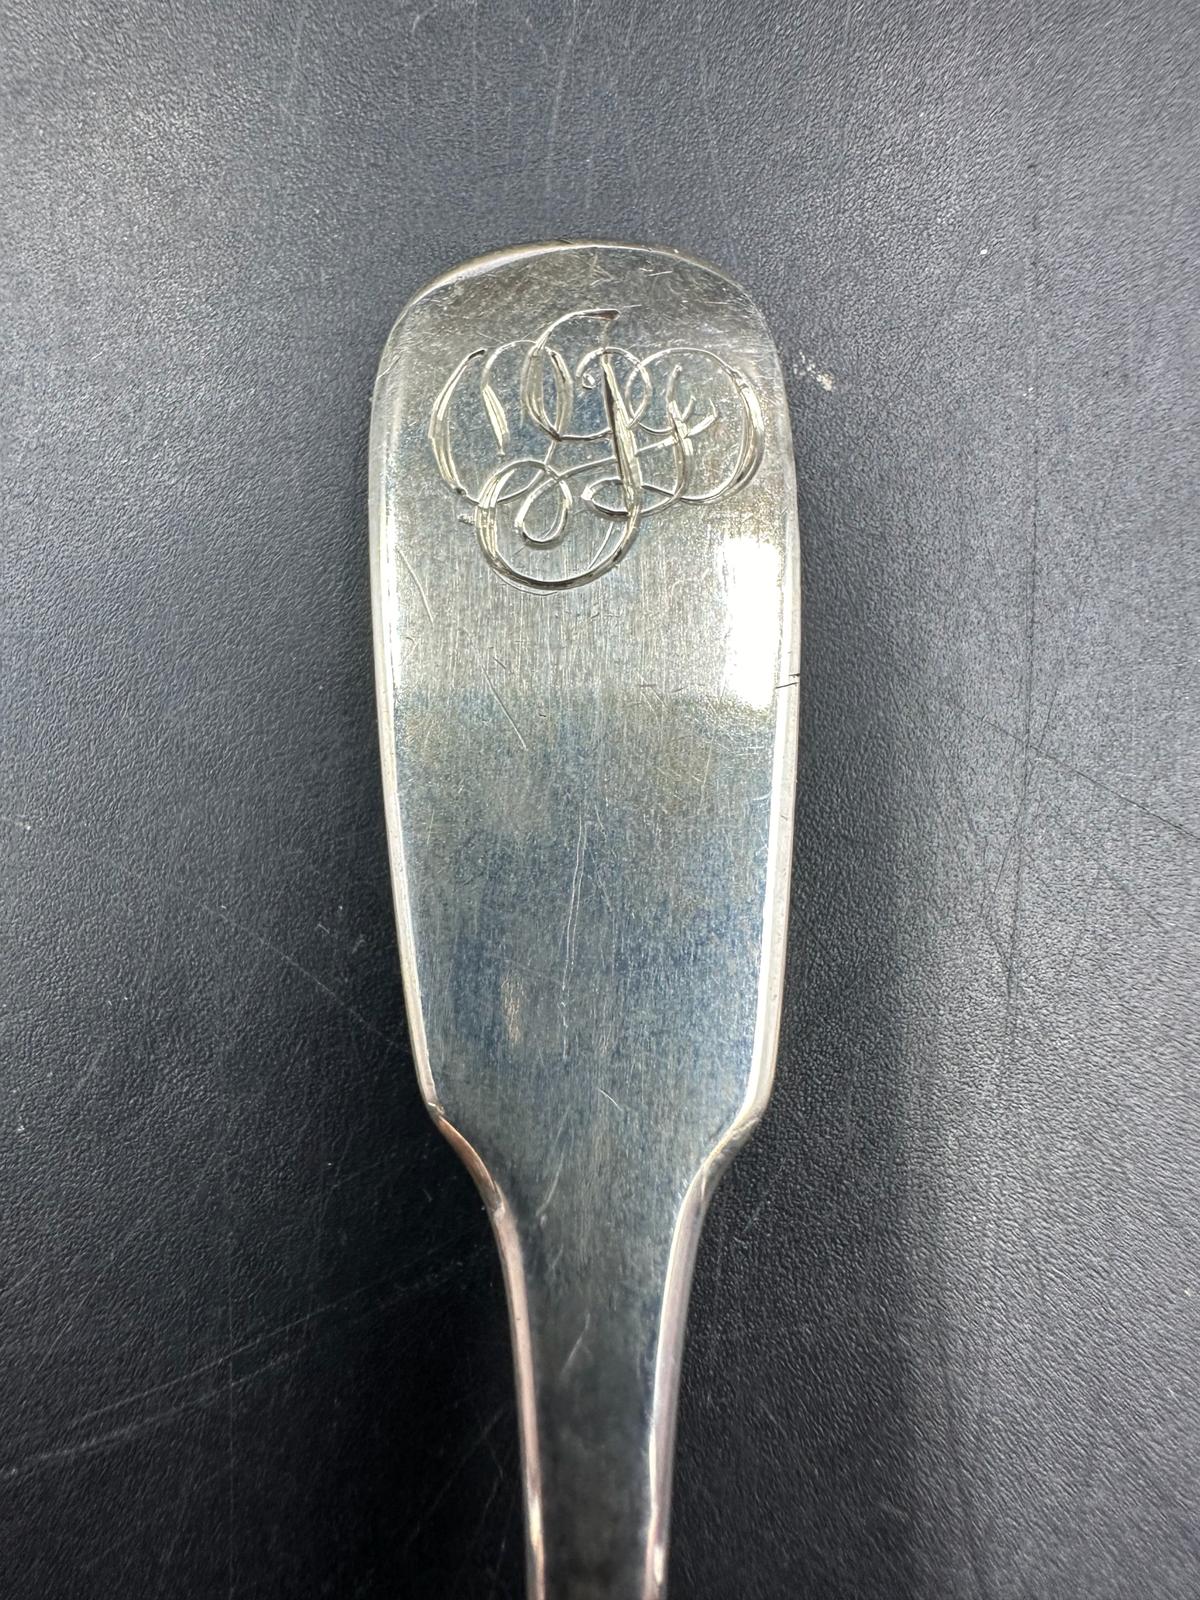 A Victorian silver teaspoon Edinburgh 1837 marked J.M.C (Total weight 16.1g) - Image 2 of 3